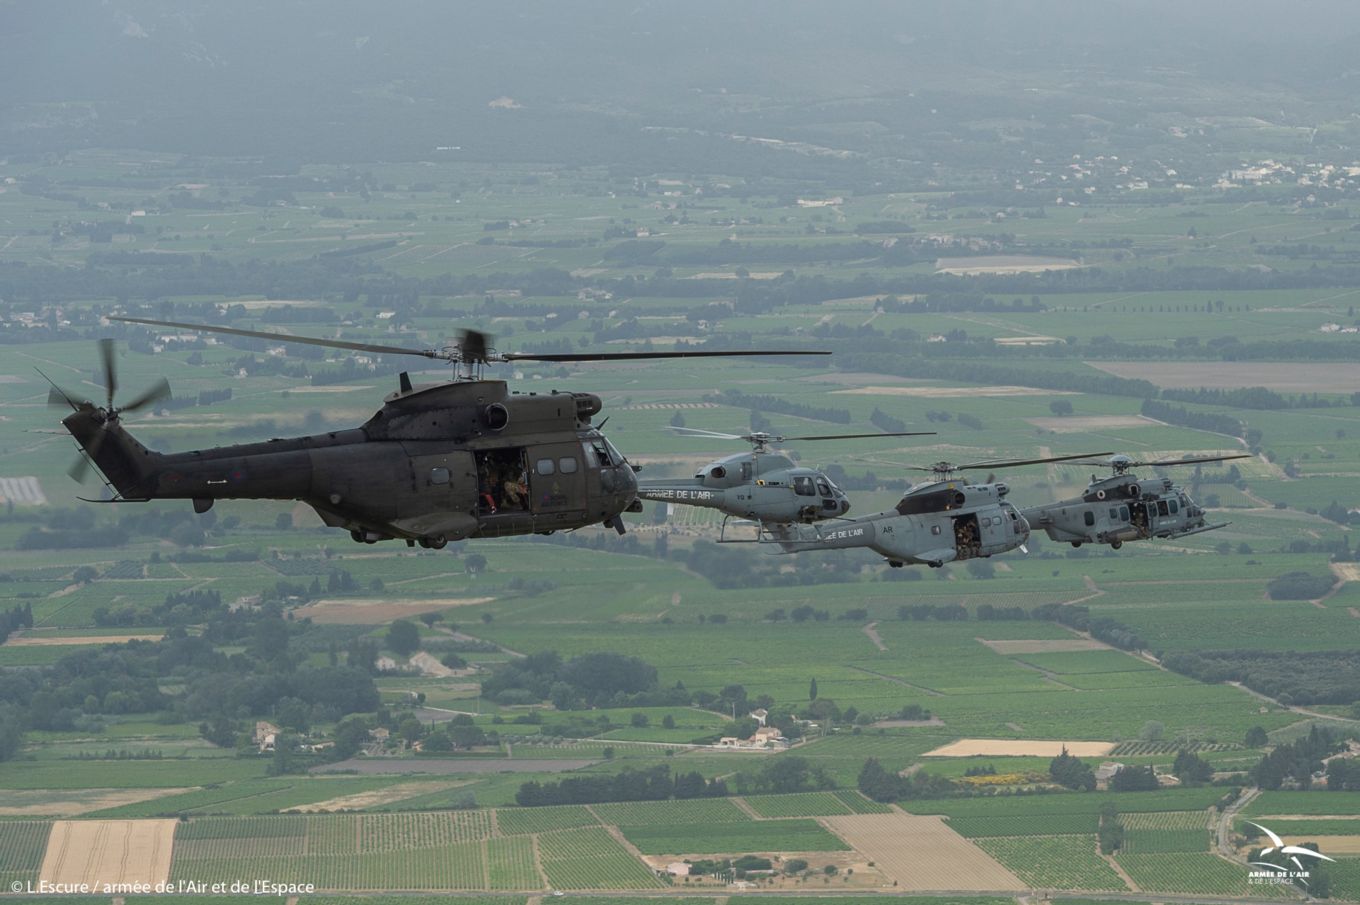 The Puma flies over the French countryside in formation with three French Air Force helicopters